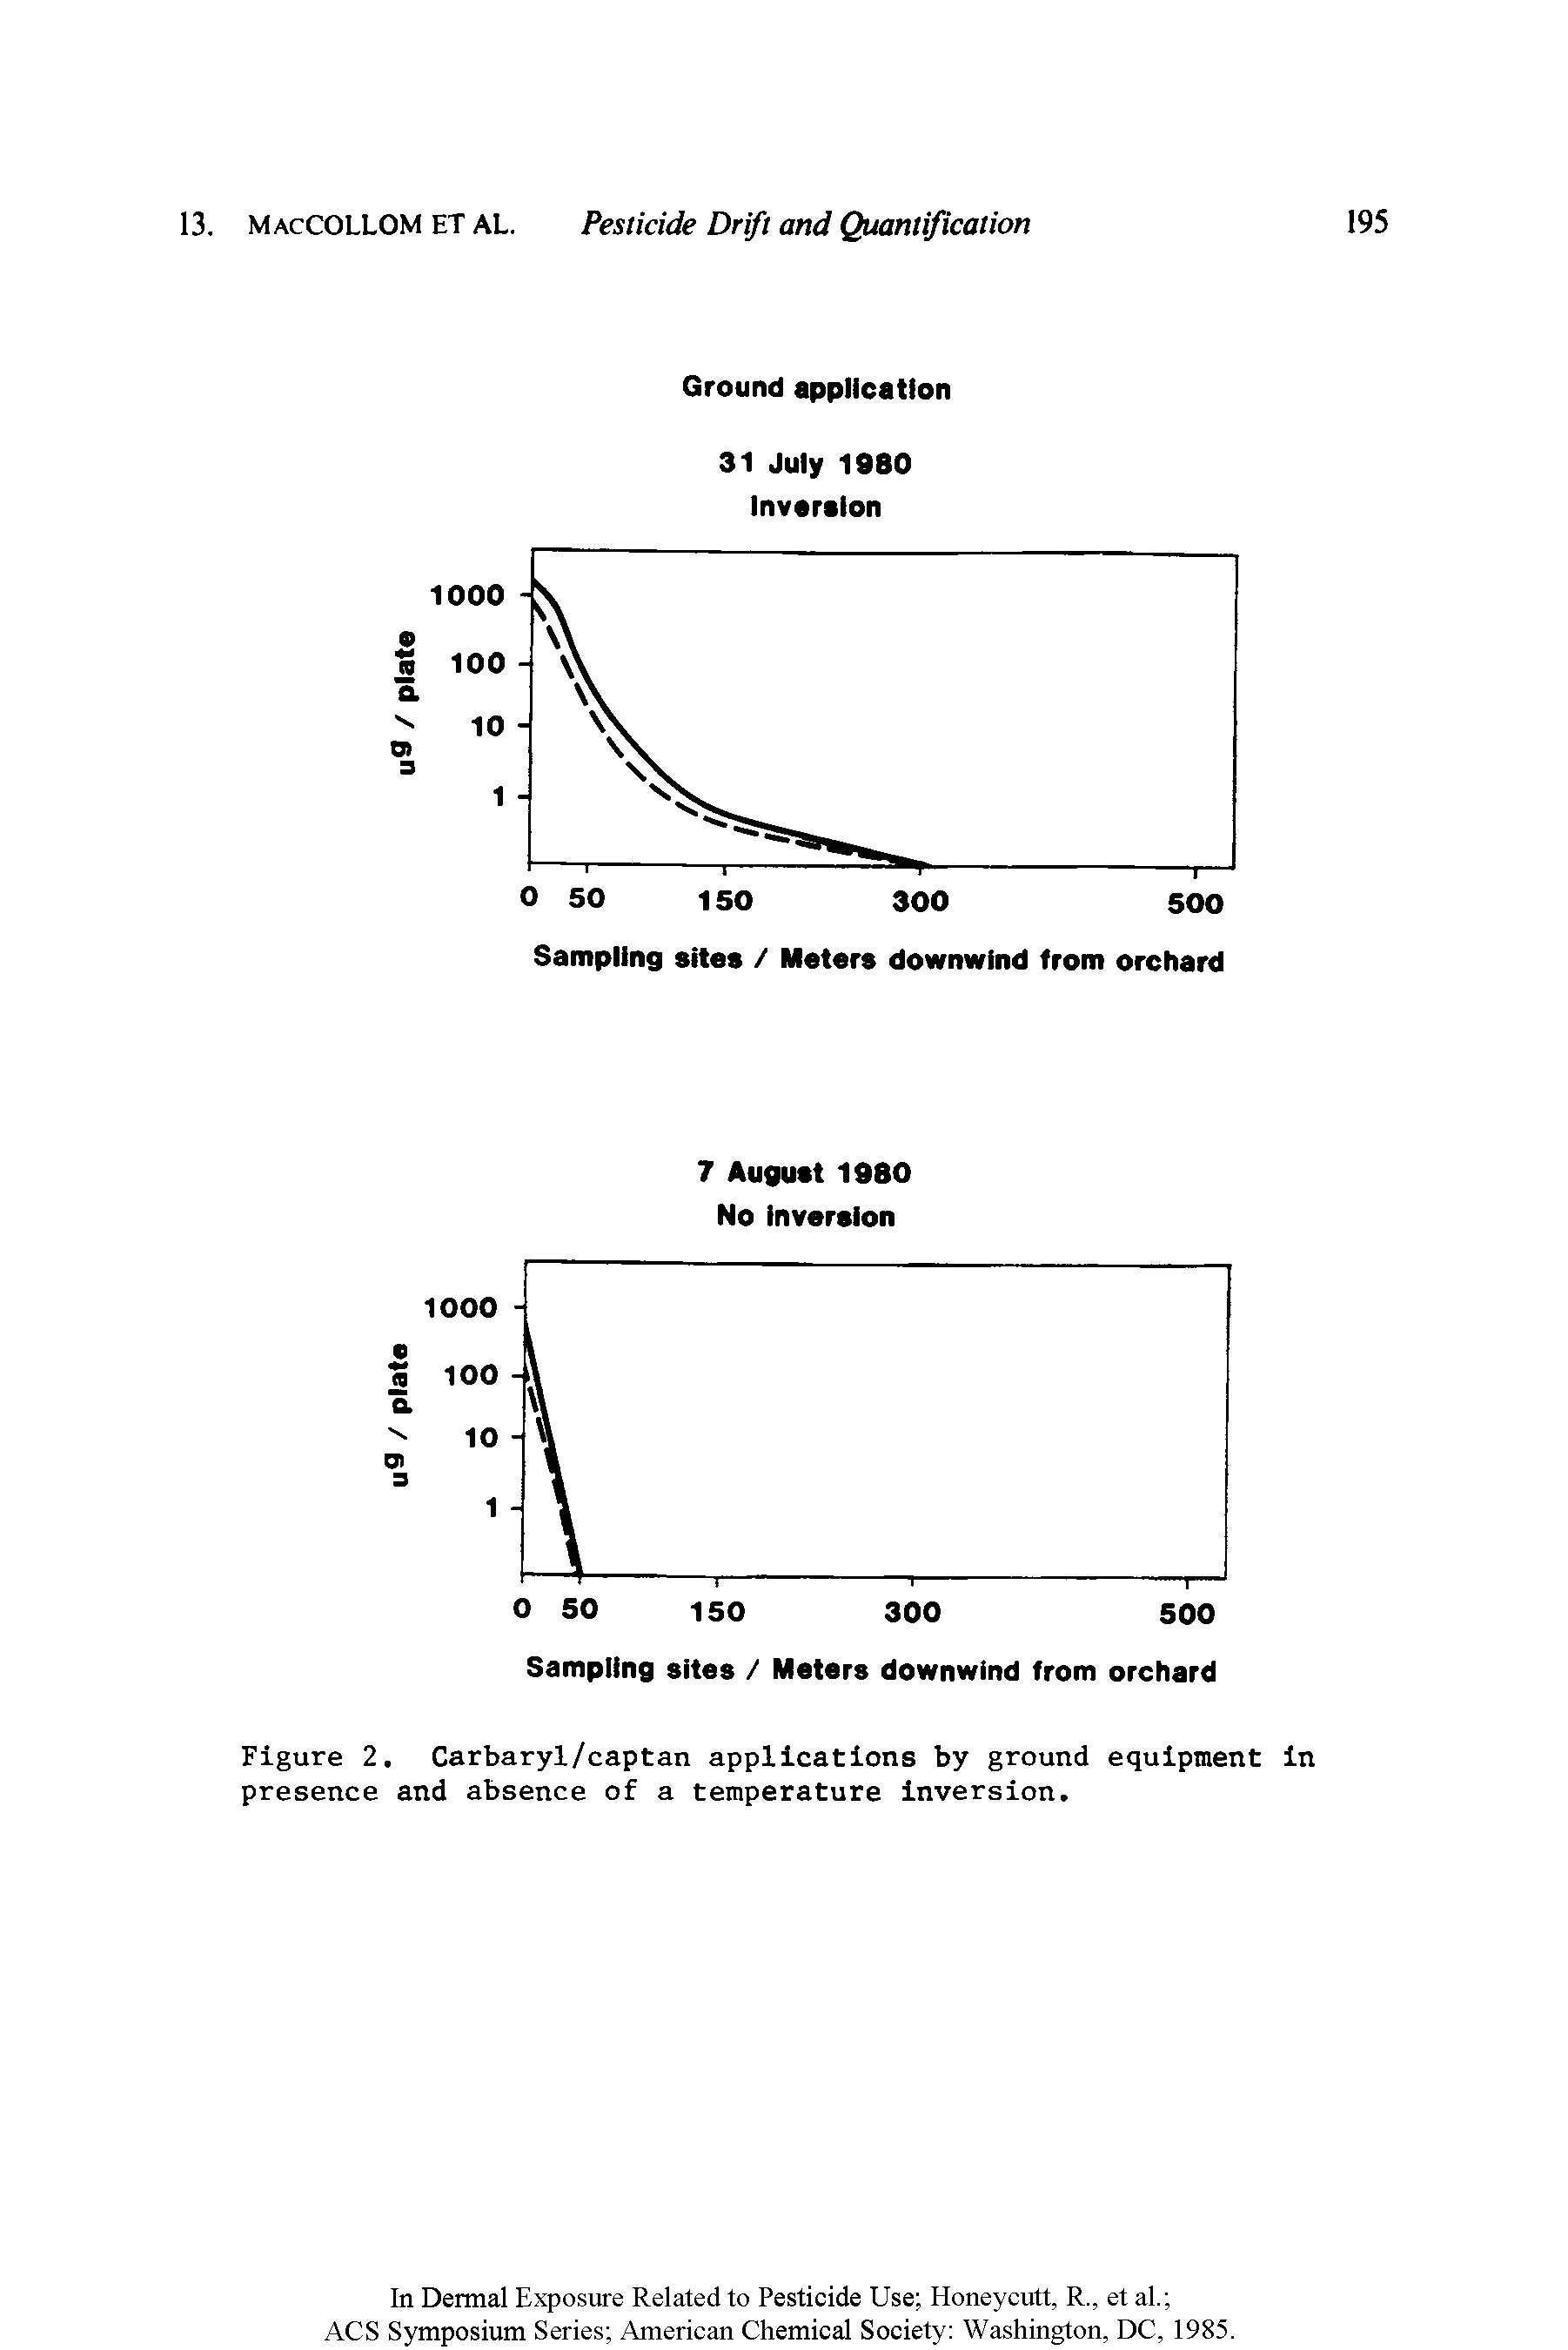 Figure 2. Carbaryl/captan applications by ground equipment in presence and absence of a temperature Inversion.